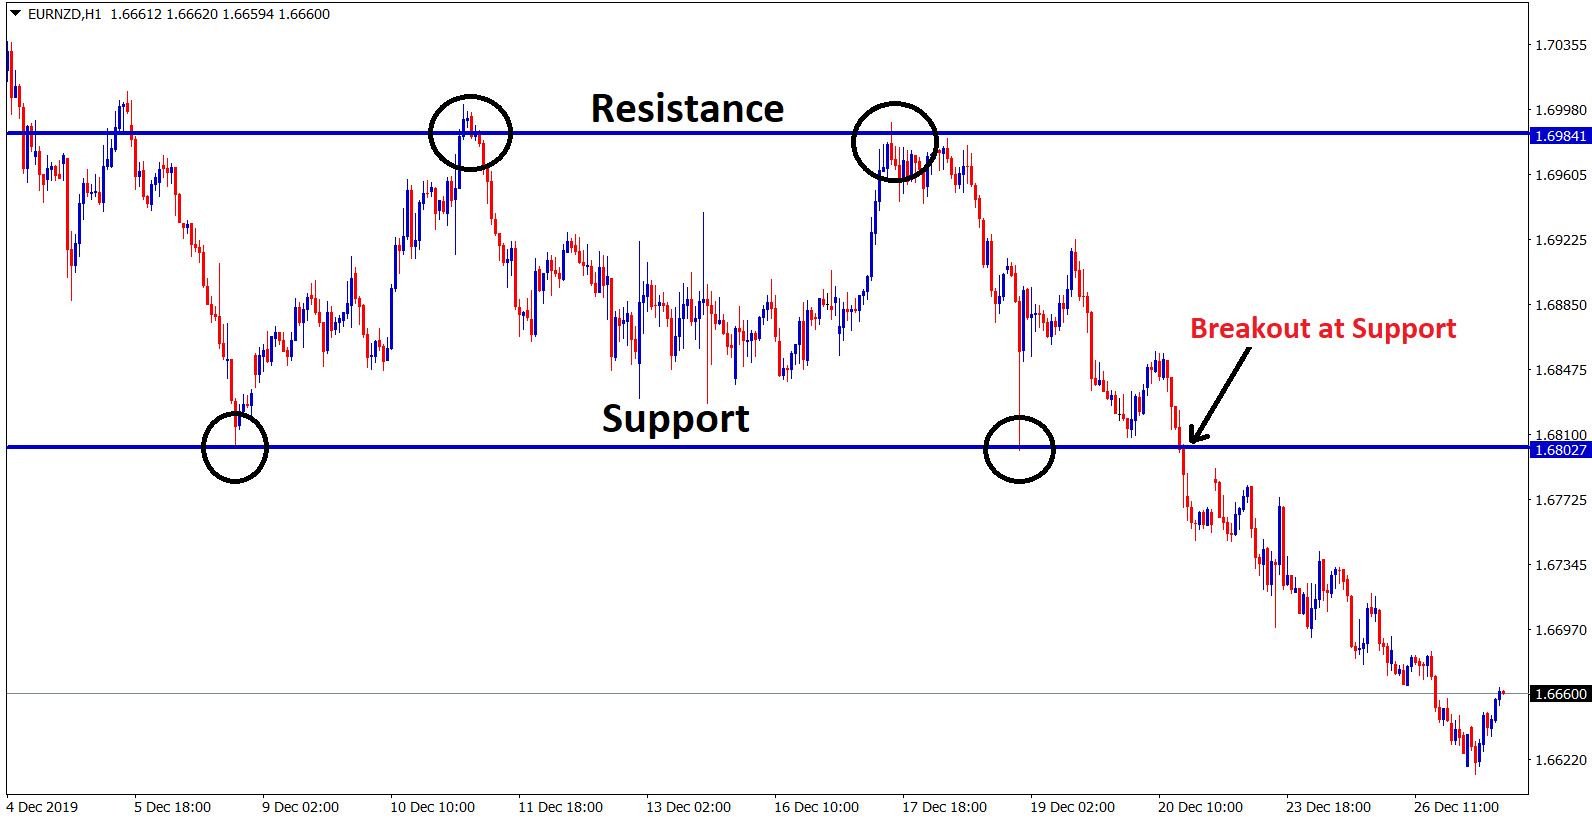 Breakout at support in eurnzd